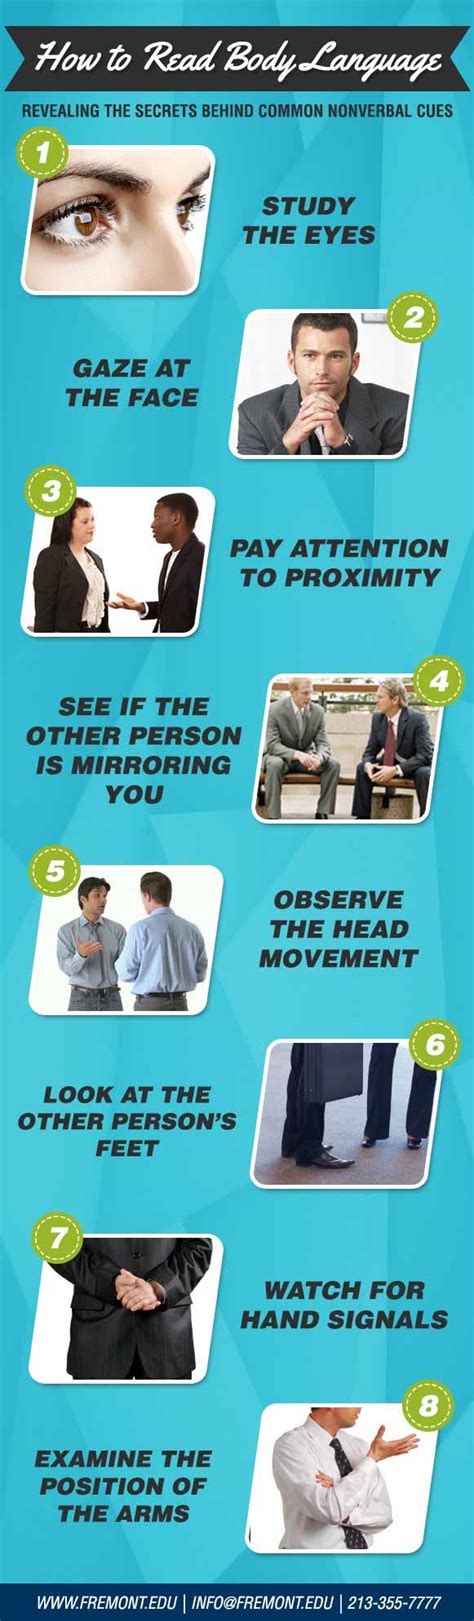 How To Correct Body Language Some Easy Tips For Body Language Wavebook